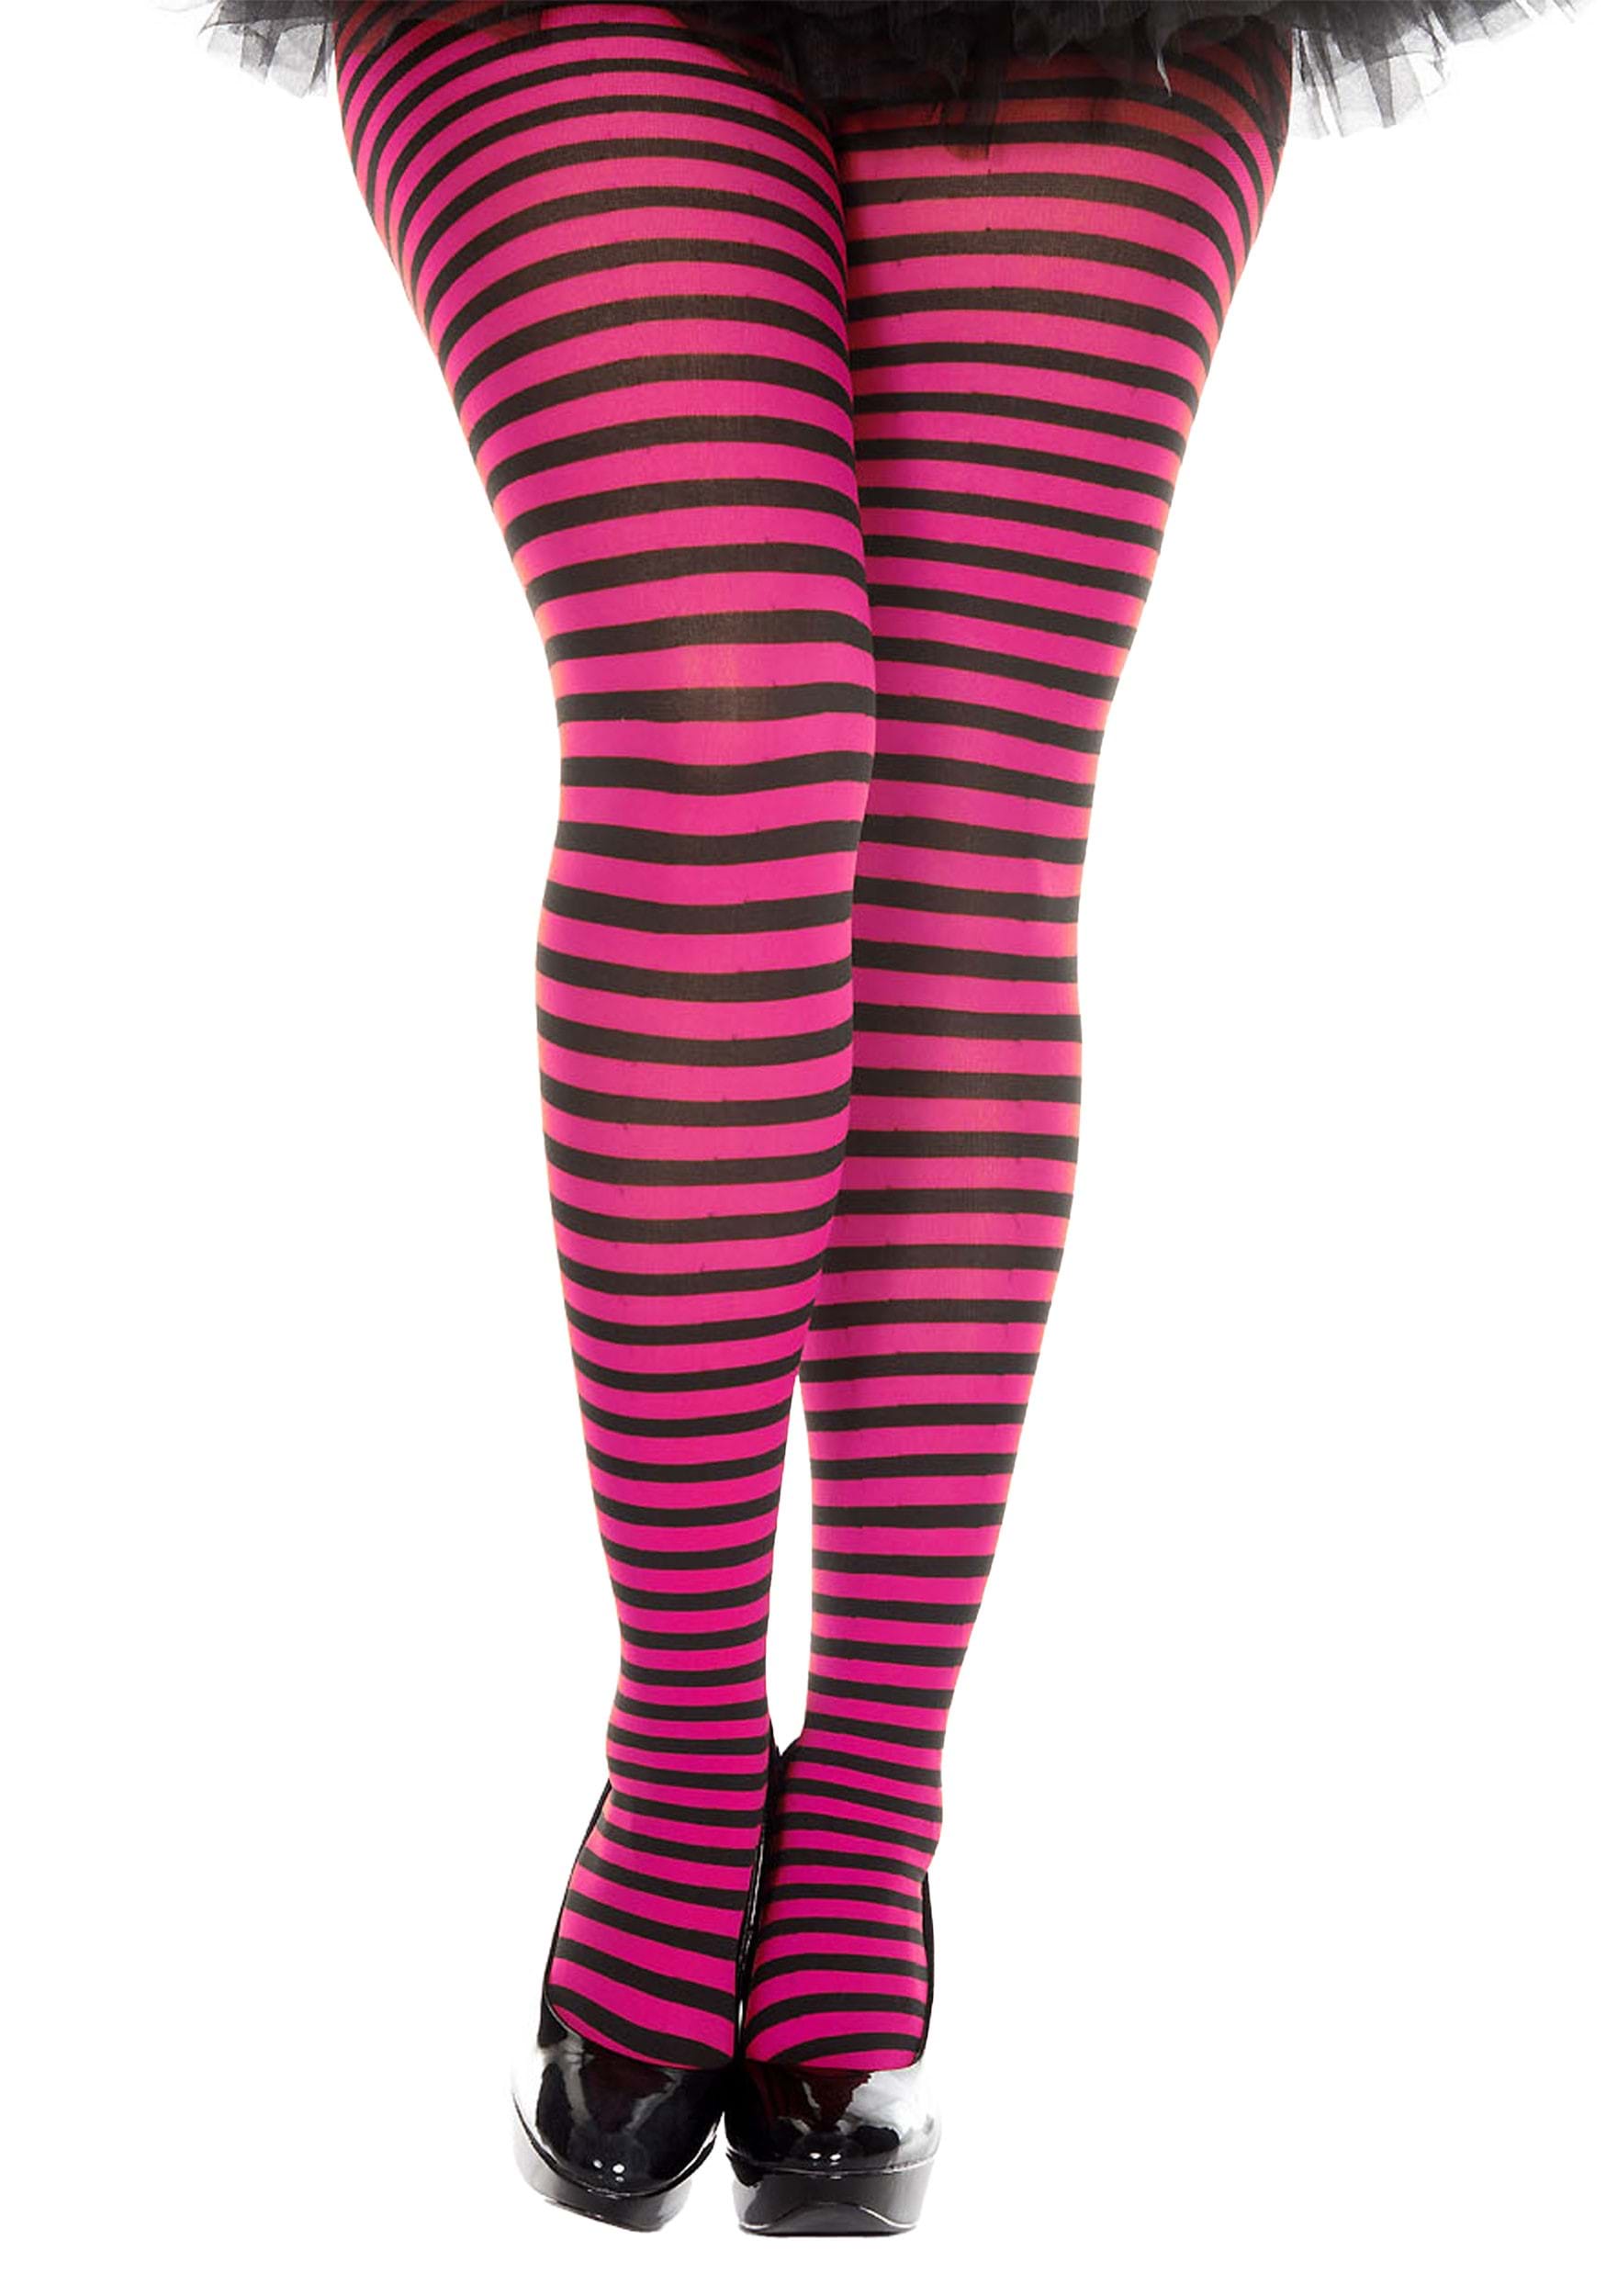 Varsity Tights by Better bodies, Colour: Black / Pink 